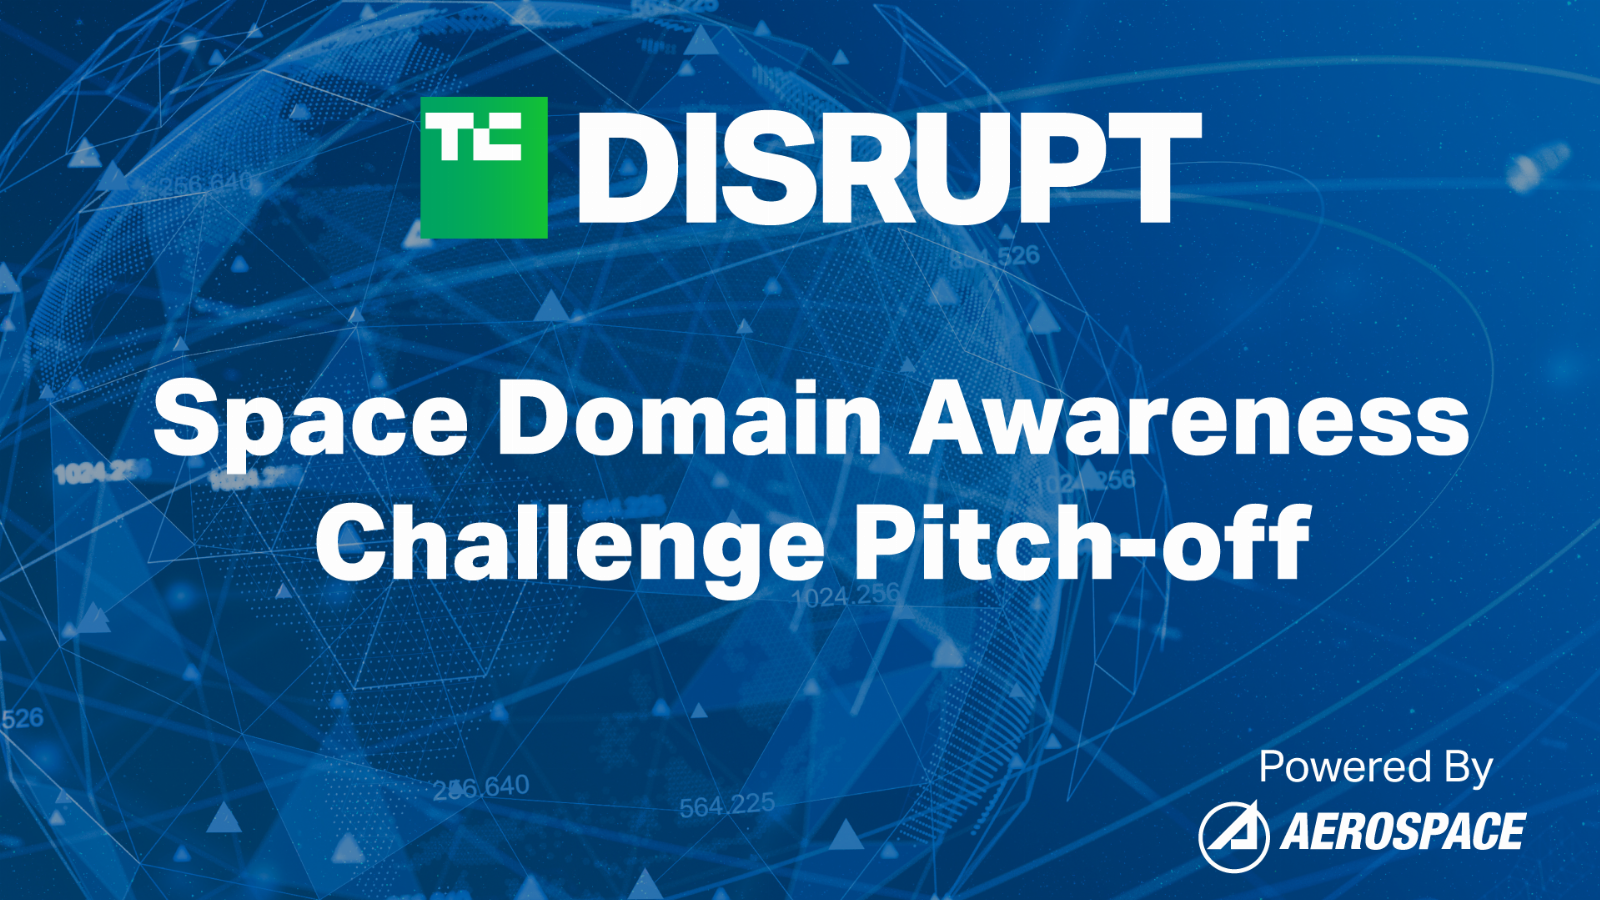 Startups, apply to the Space Domain Awareness Challenge Pitch-off at TC Disrupt 2023